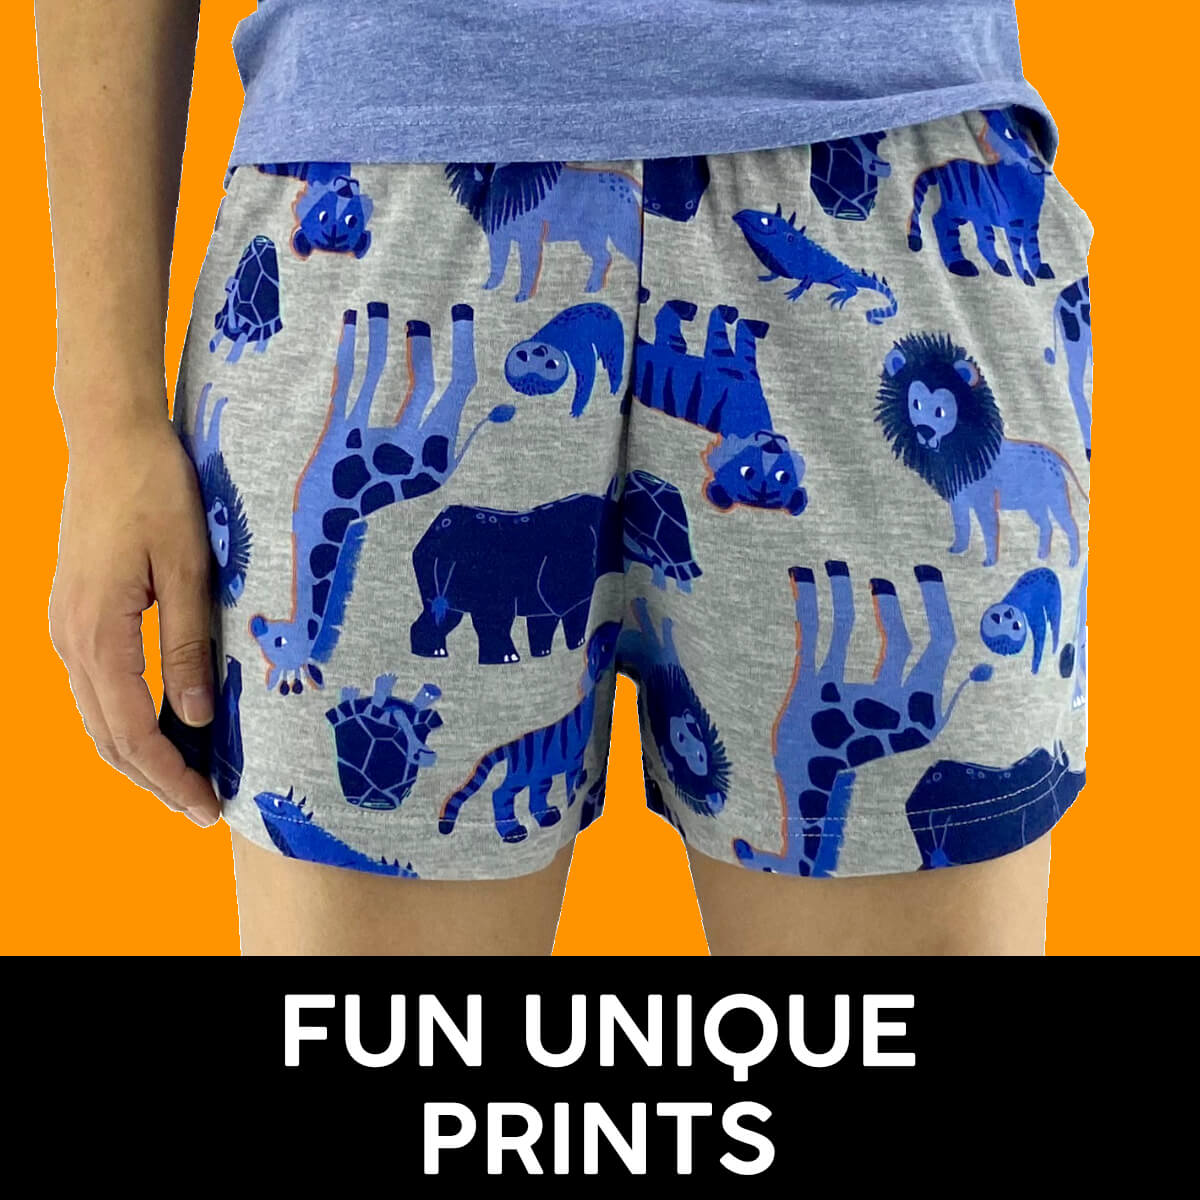 f you've always been envious of how comfy men boxer shorts are, or if you’ve secretly bought a couple pairs to kick back in, then you need these shorts. Just as comfy, but way cuter!